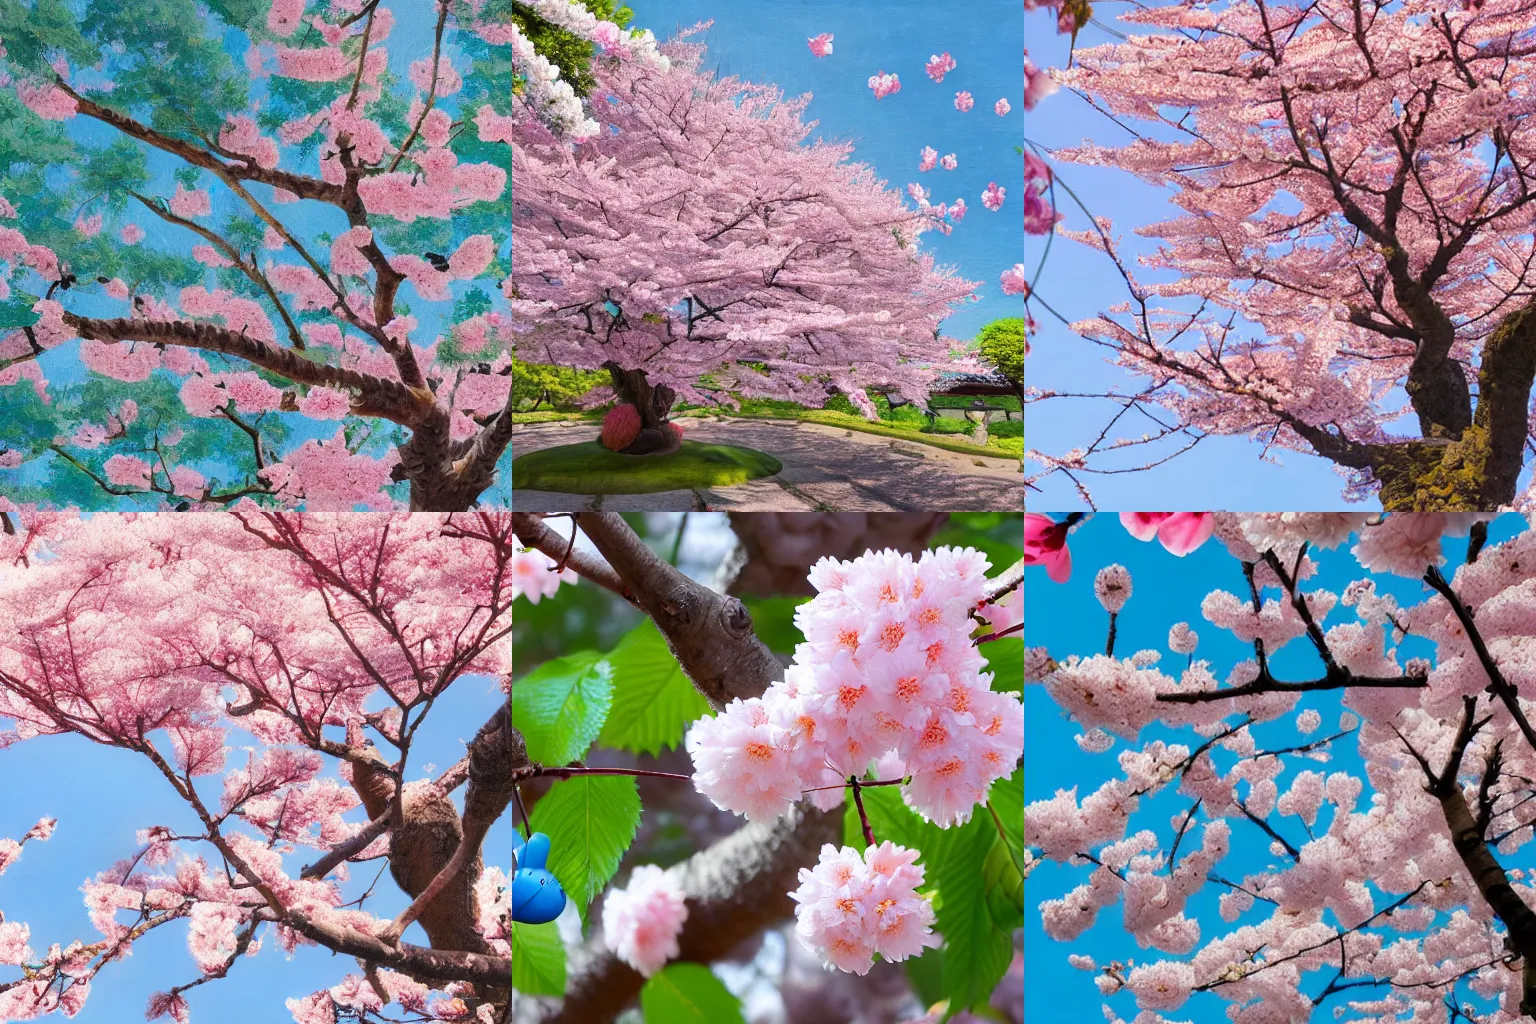 Prompt: large japanese cherry blossom with pink flowers hanging overtop a blue totoro that is collecting acorns, highly detailed, low angle, painterly styled